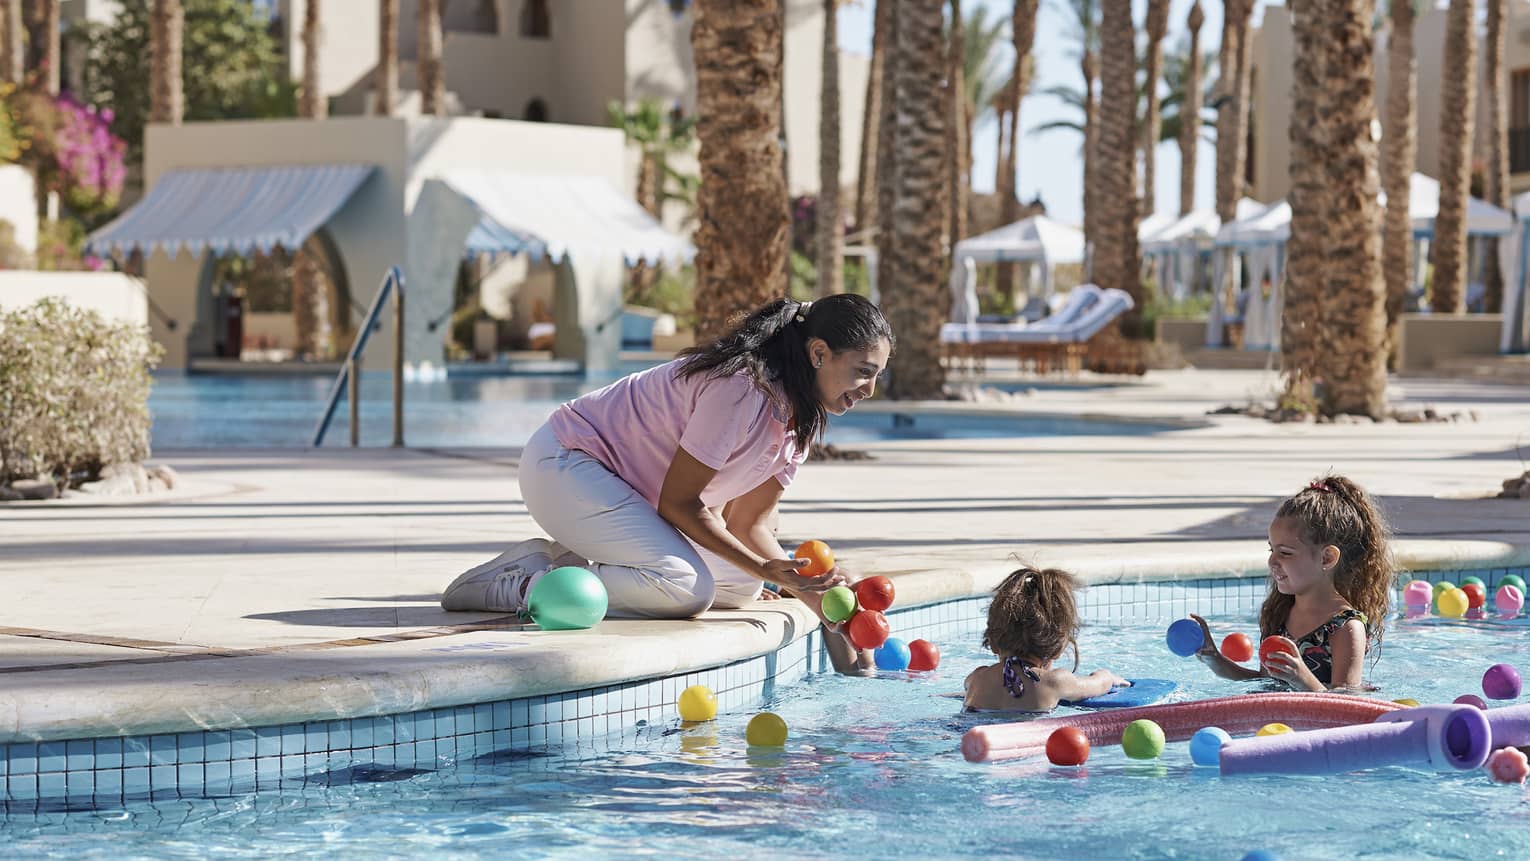 Woman supervising two children in pool with pool toys